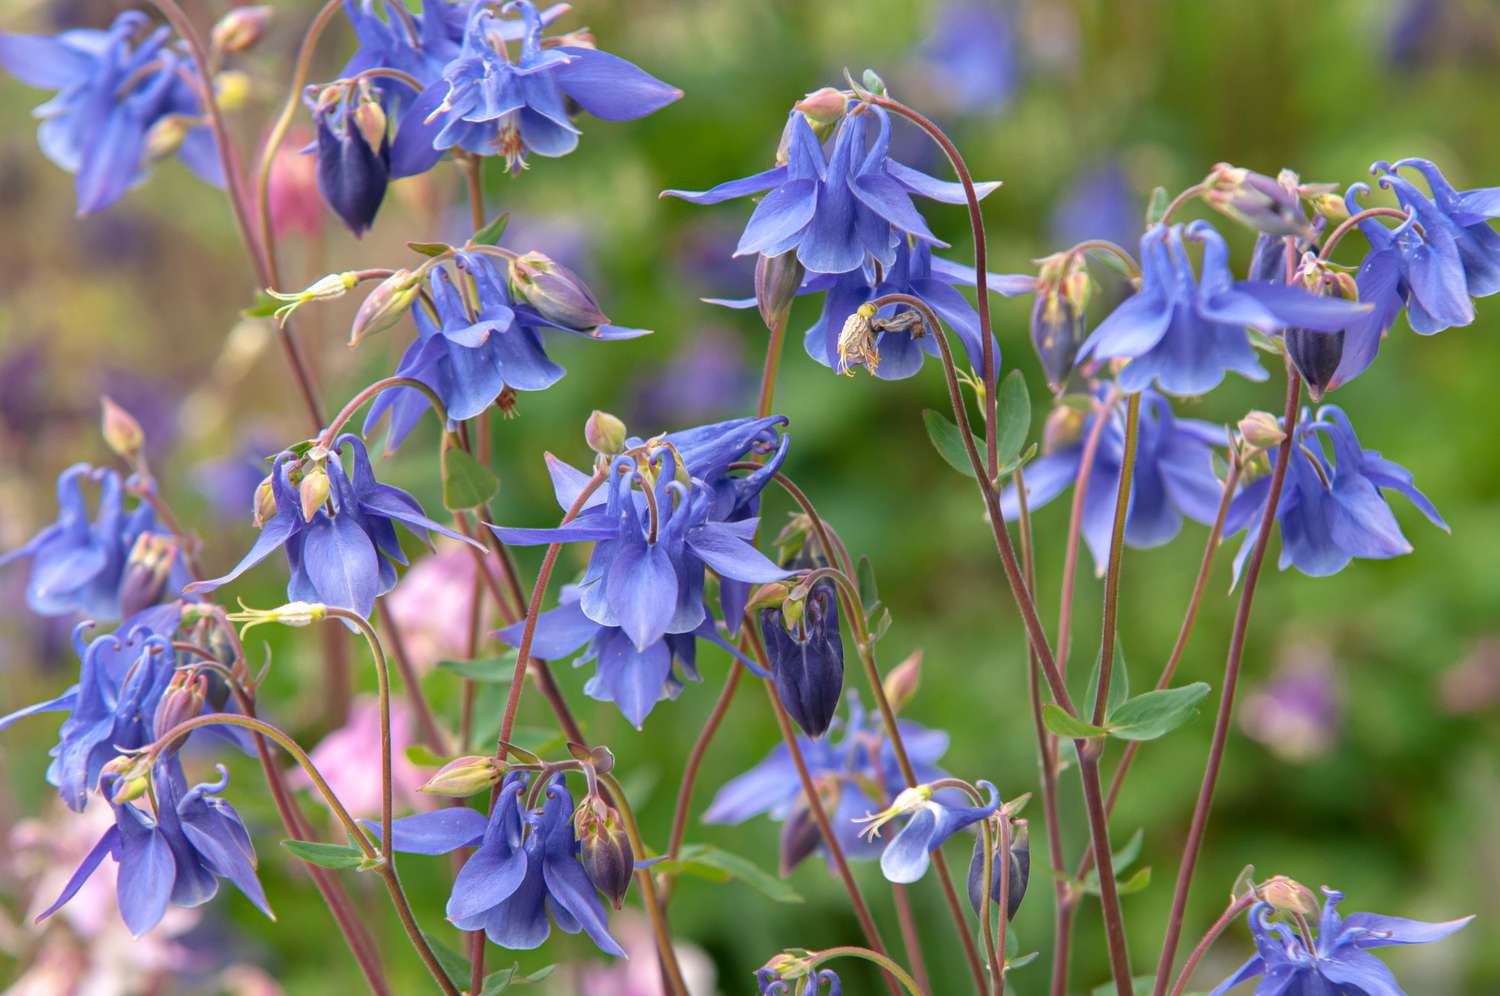 Columbine plant with blue-purple flowers on thin red stems